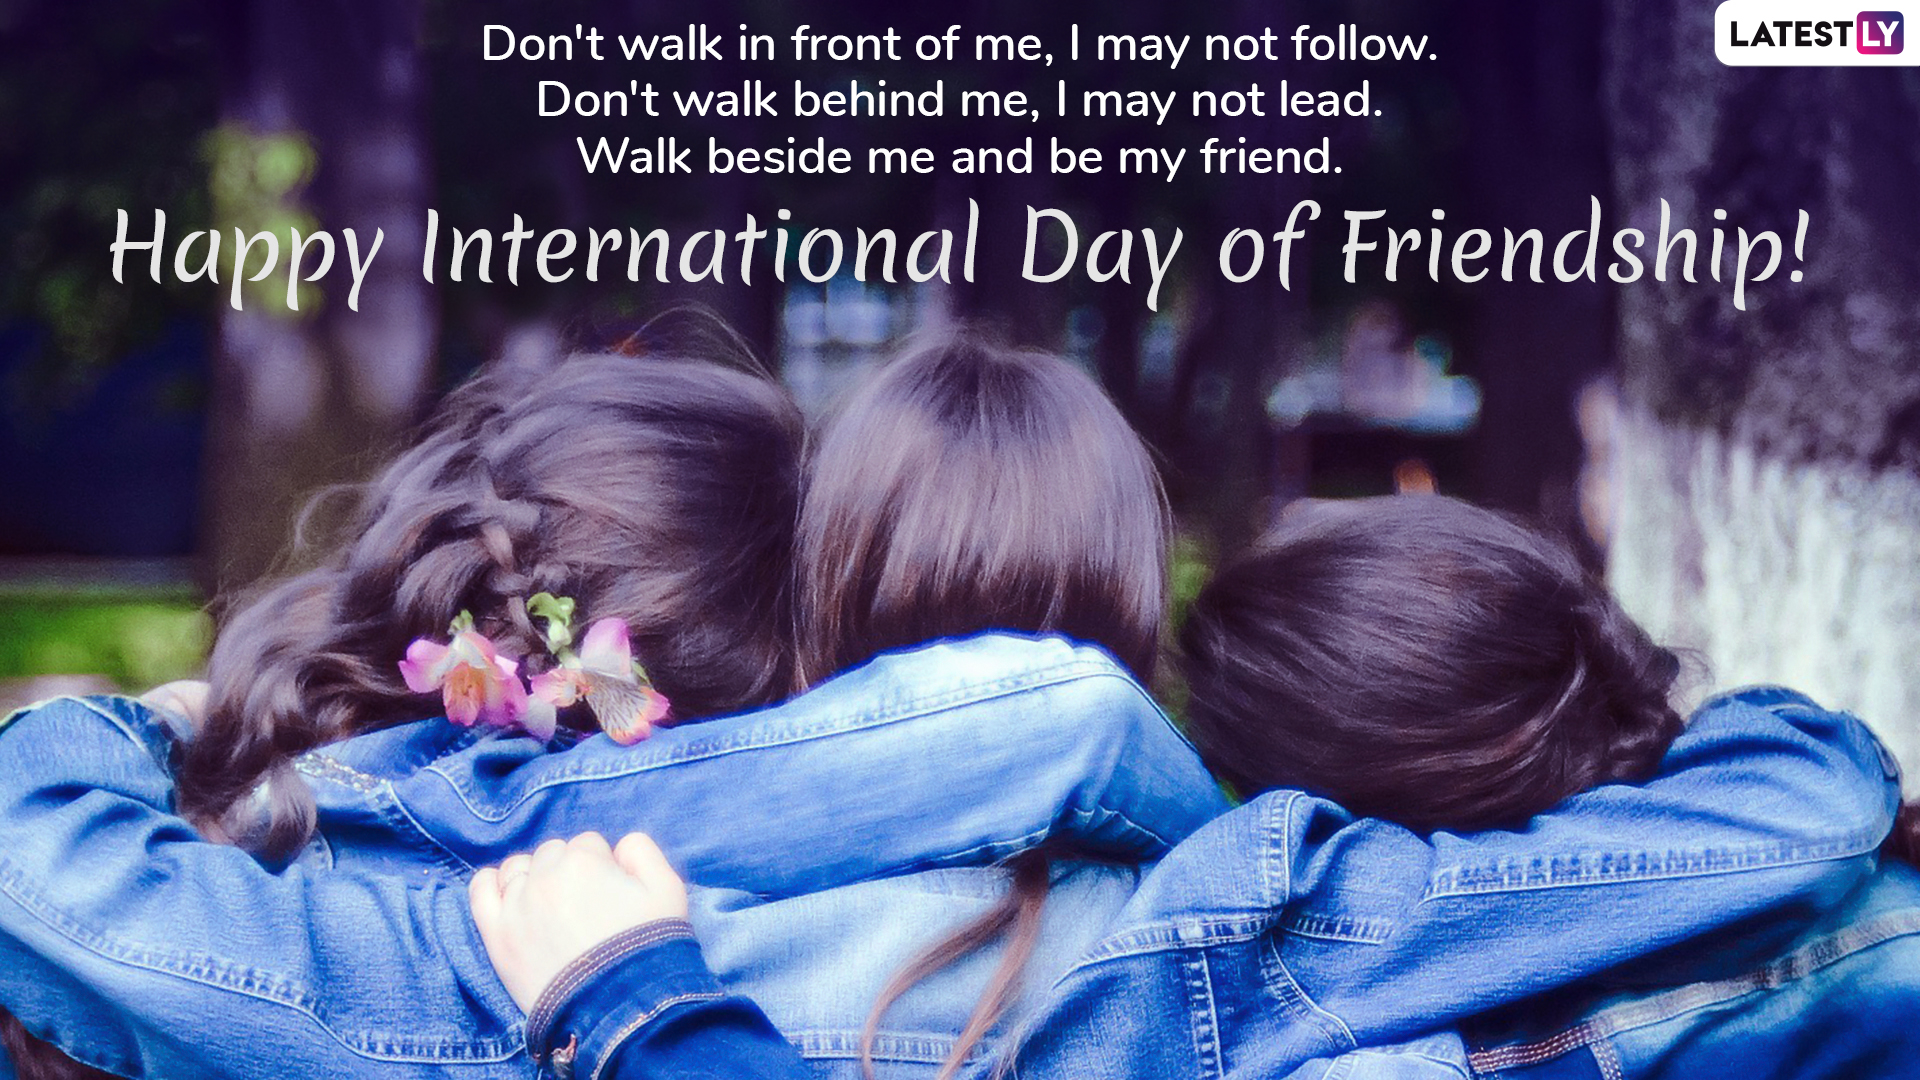 Those that the day my friend. Friends Day. International Friendship. International Day of Friendship картинки.